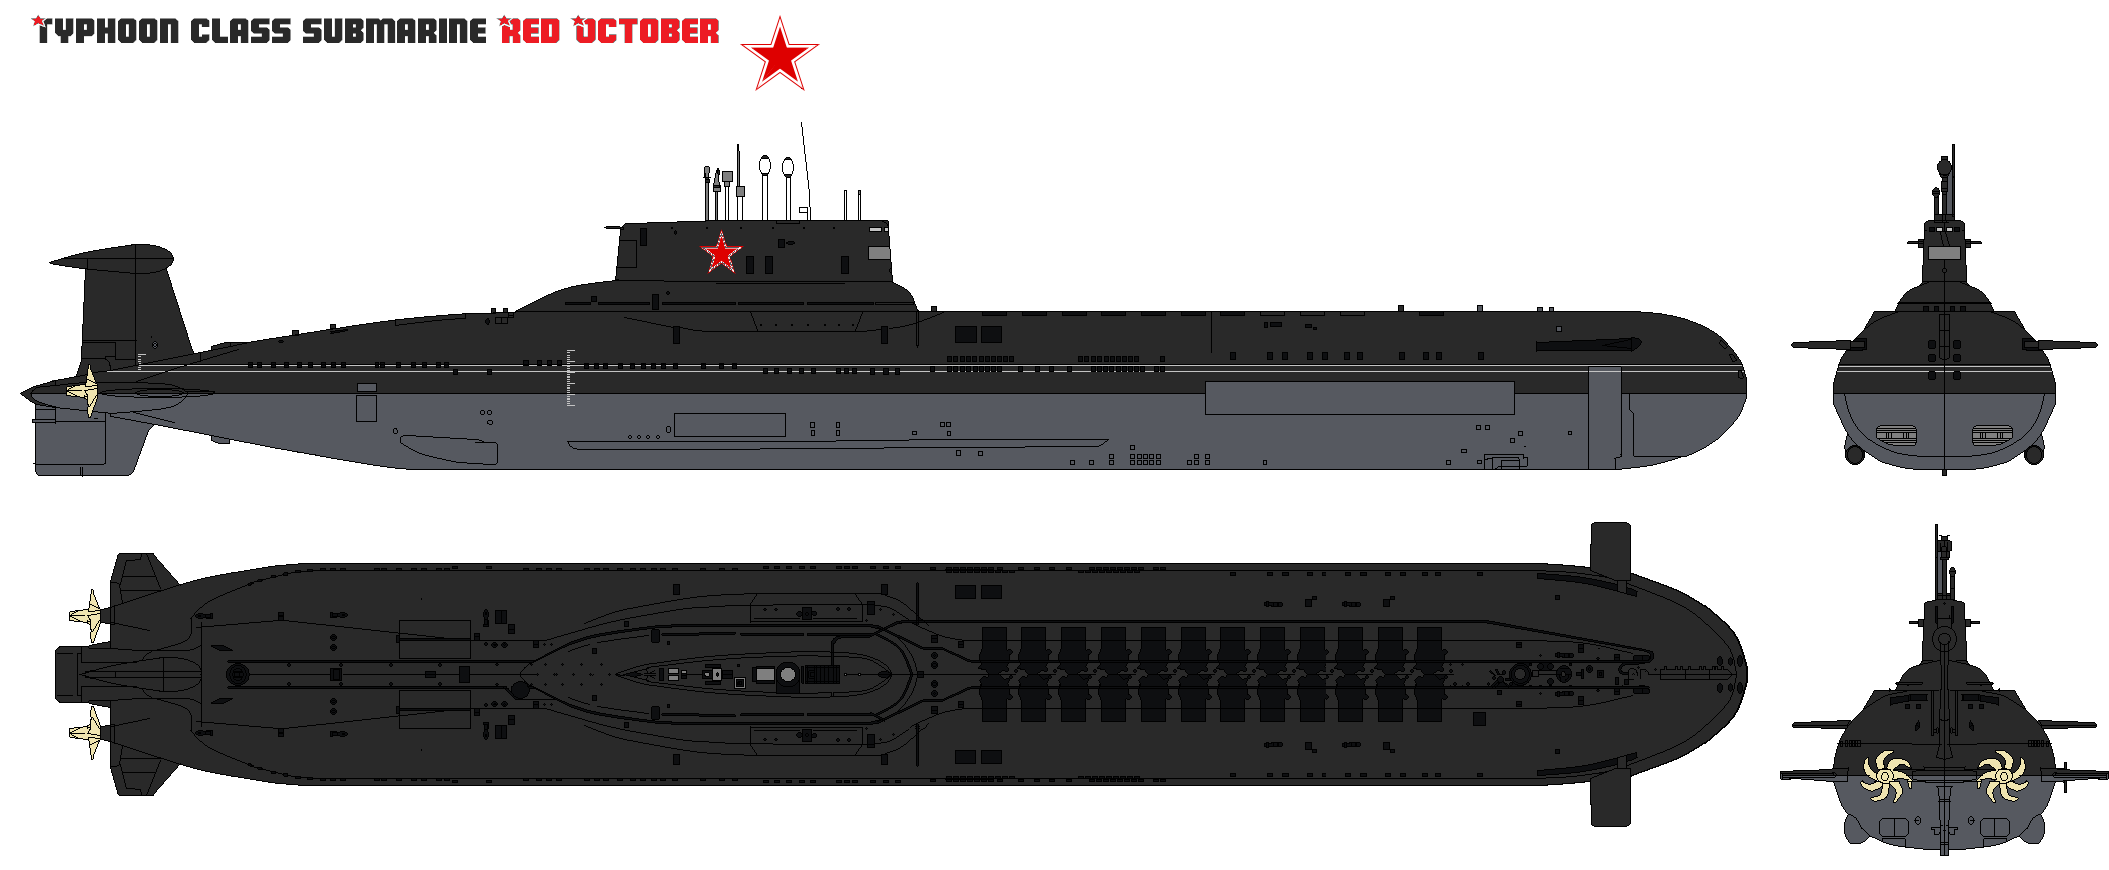 assimilation udvide Hobart Typhoon class submarine Red October by bagera3005 on DeviantArt